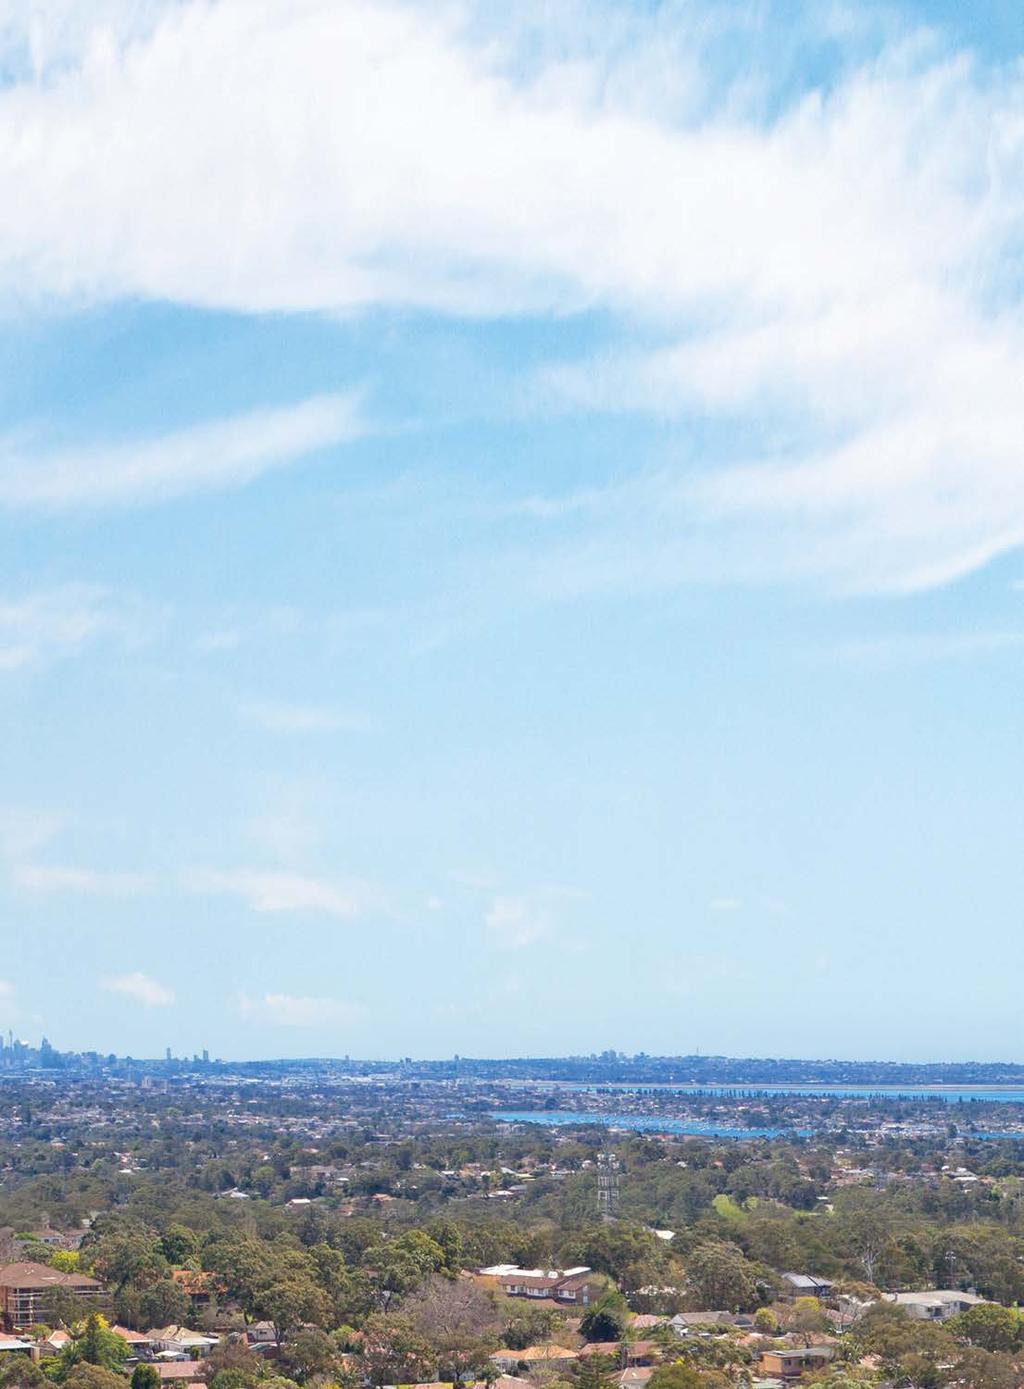 South Village is nestled in one of the highest points in the Sutherland Shire.